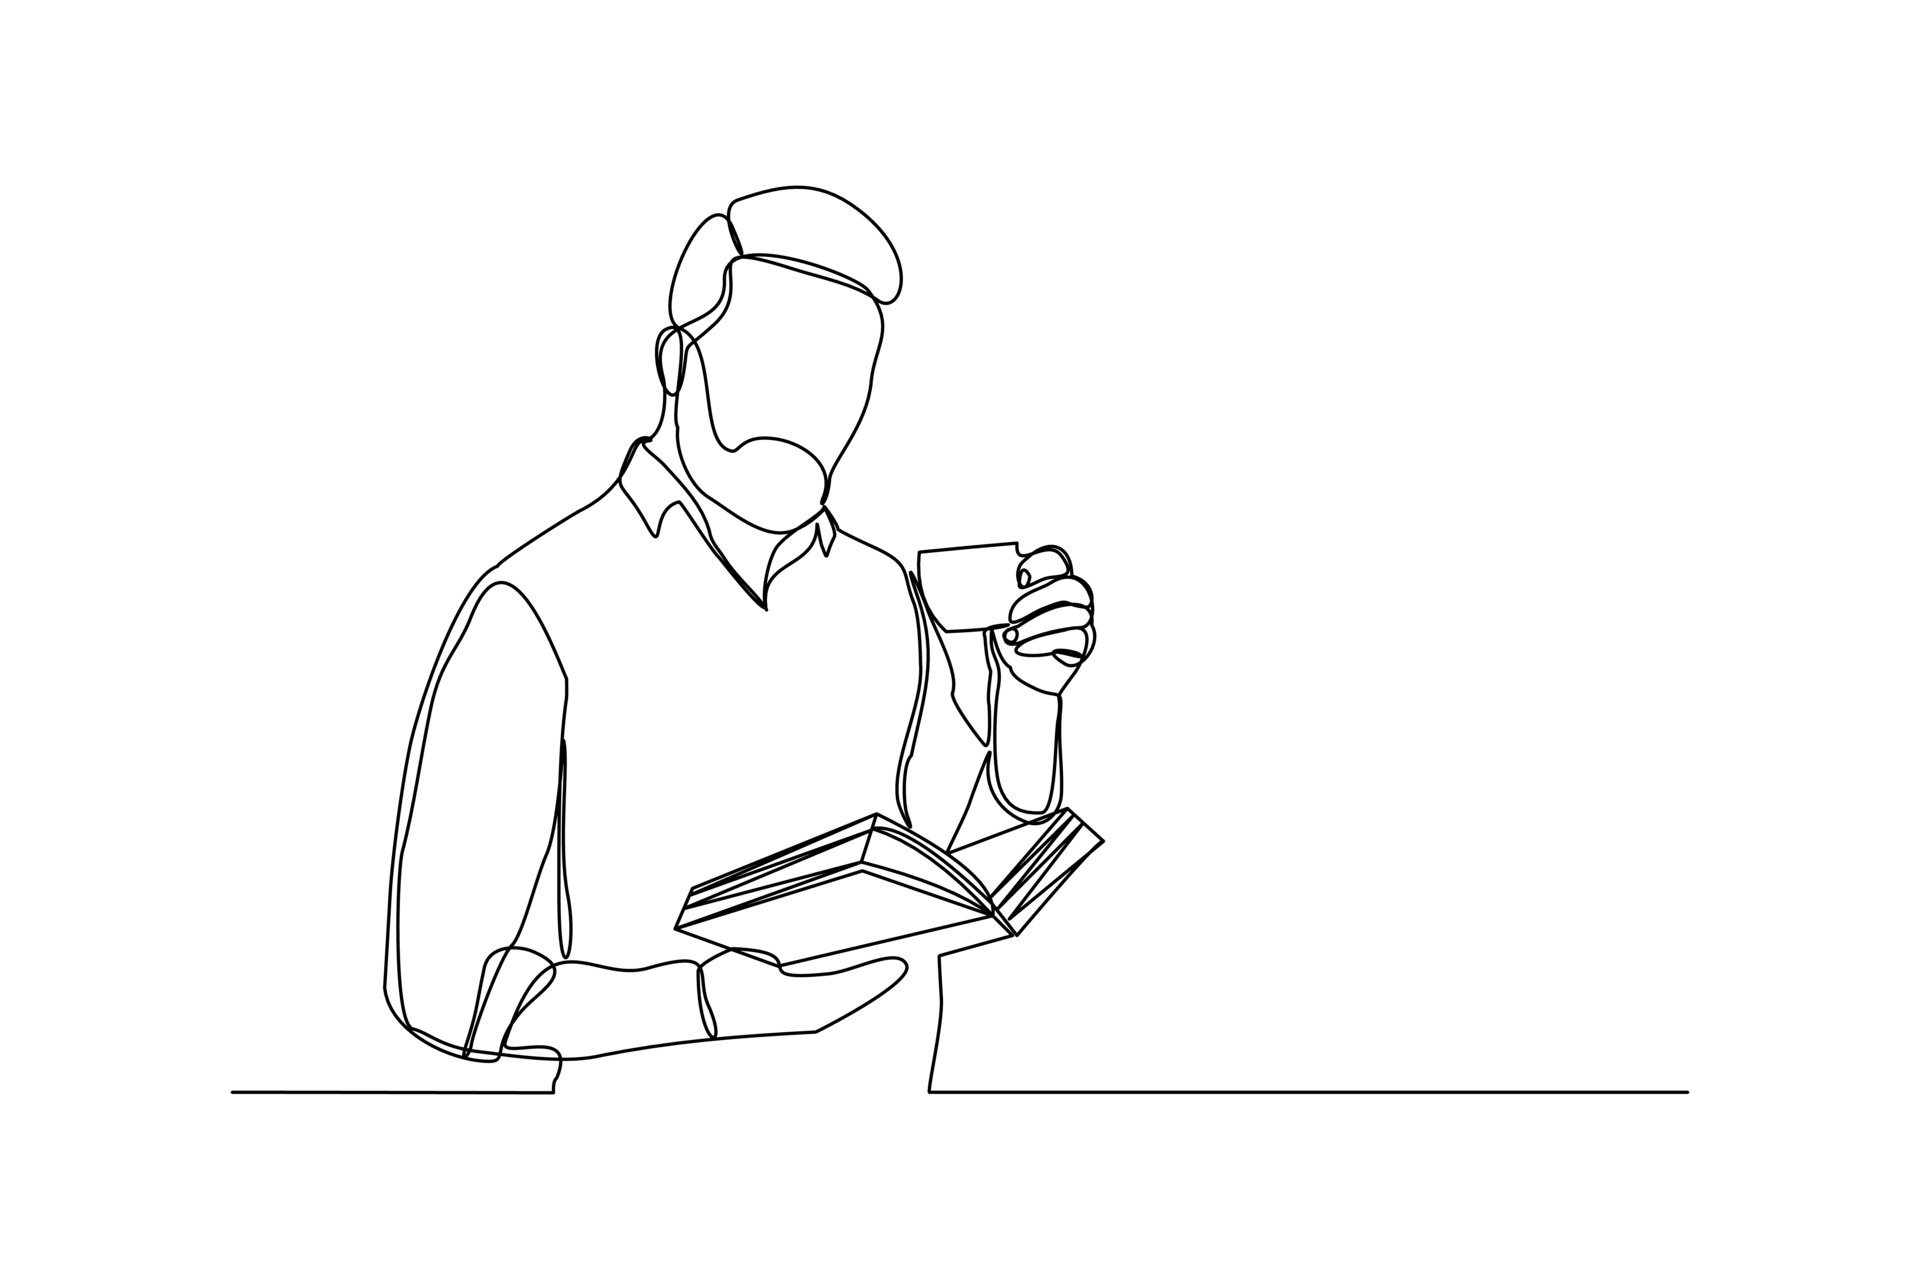 https://static.vecteezy.com/system/resources/previews/005/306/573/original/continuous-line-drawing-of-business-man-reading-book-and-drinking-cup-of-coffee-single-one-line-art-of-worker-lifestyle-illustration-free-vector.jpg